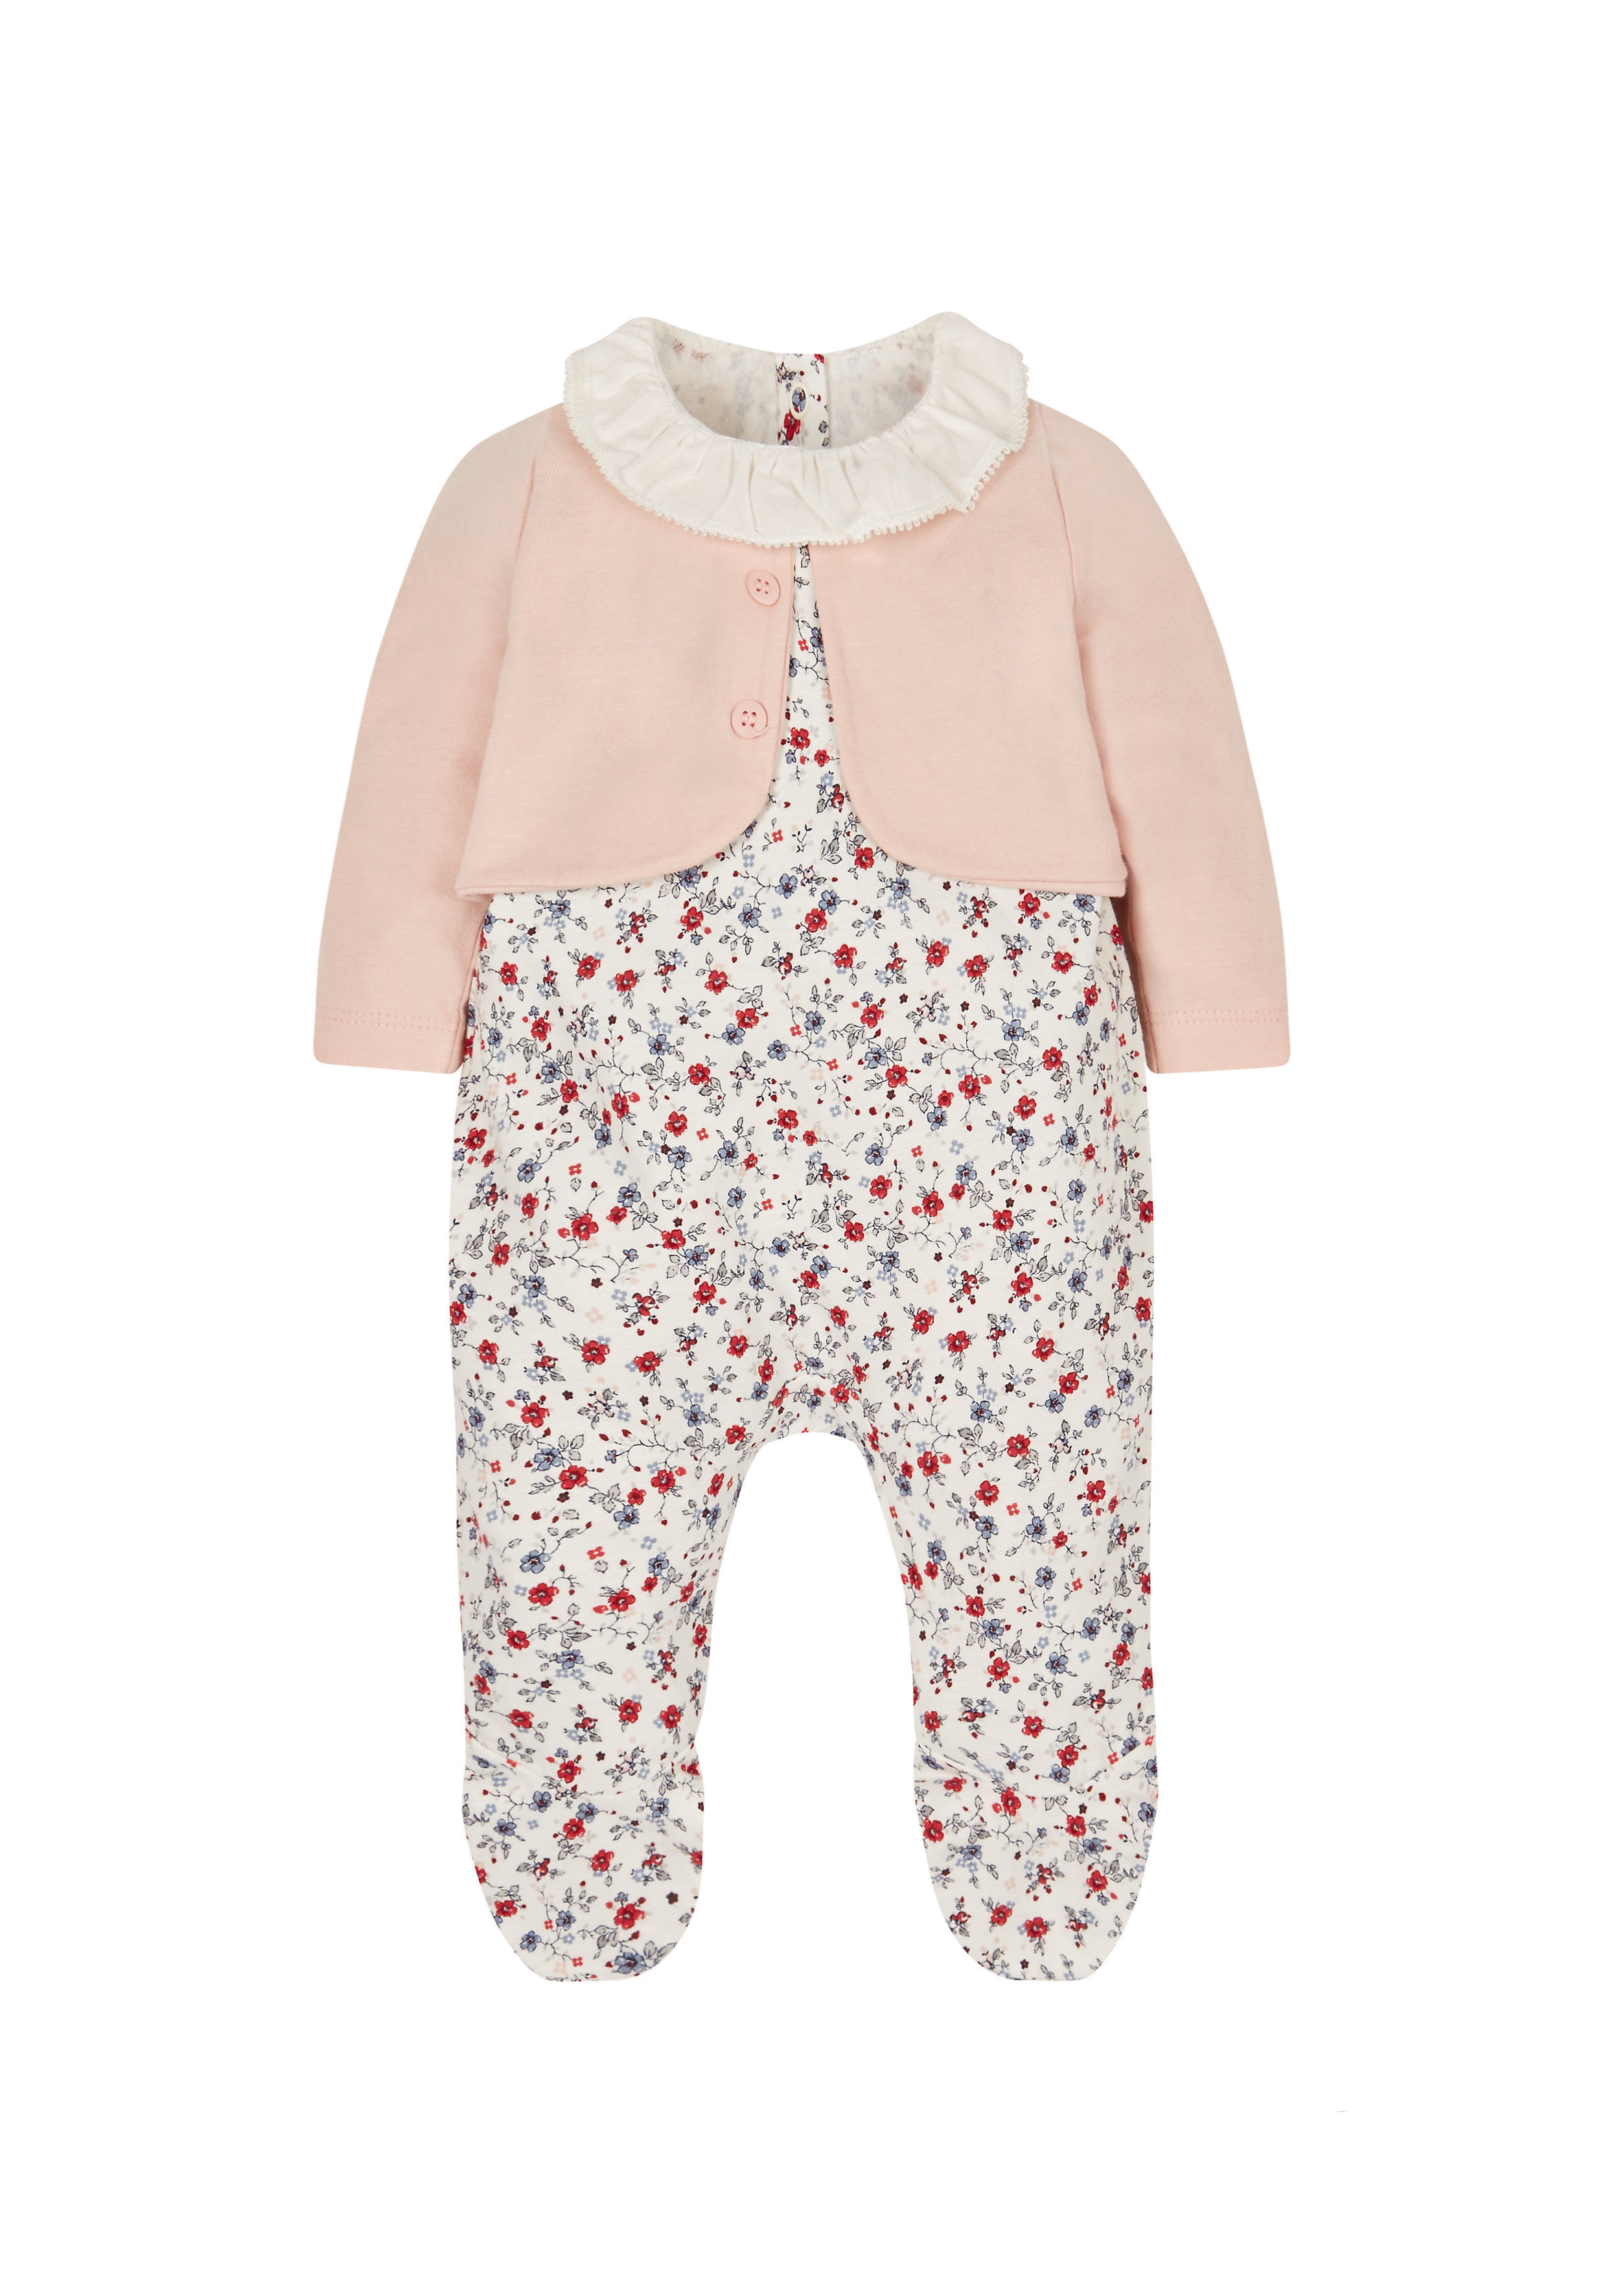 Mothercare | Girls Full Sleeves Romper Floral Print - Multicolor 0